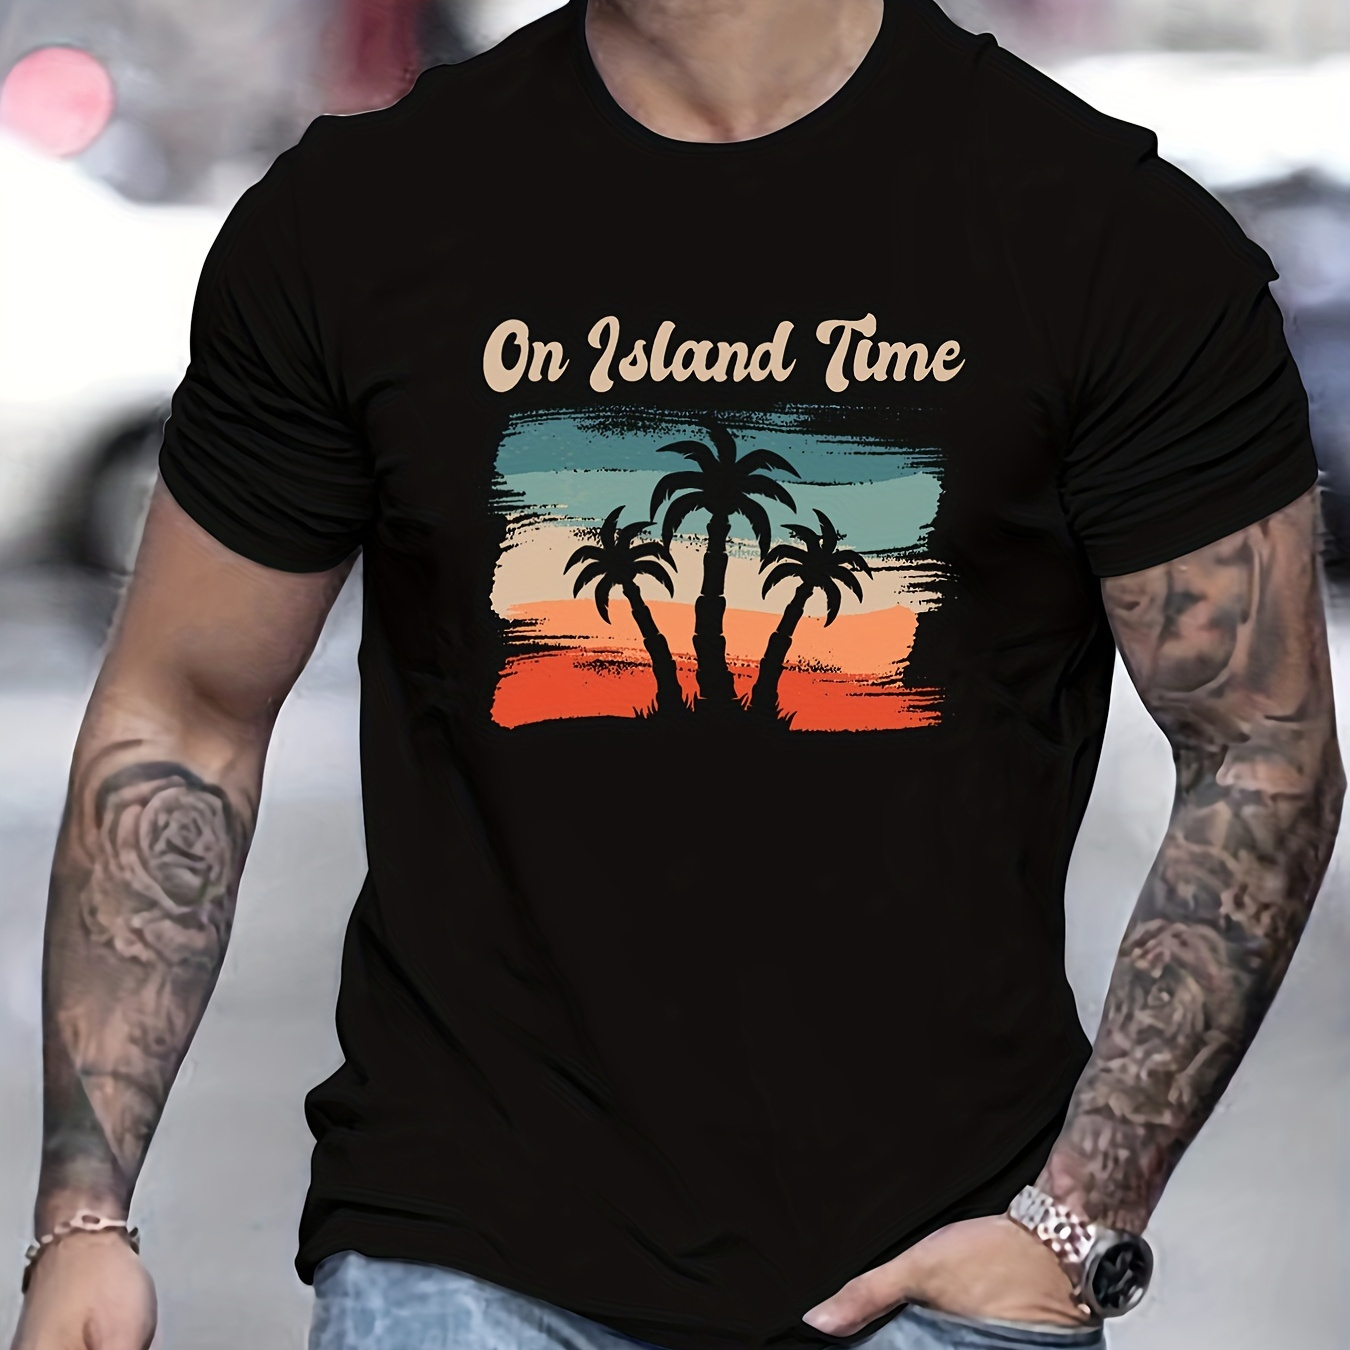 

Island Style Coconut Tree & Sunset Pattern, Men's T-shirt For Summer Vacation, Men's Trendy Graphic Crew Neck Tops